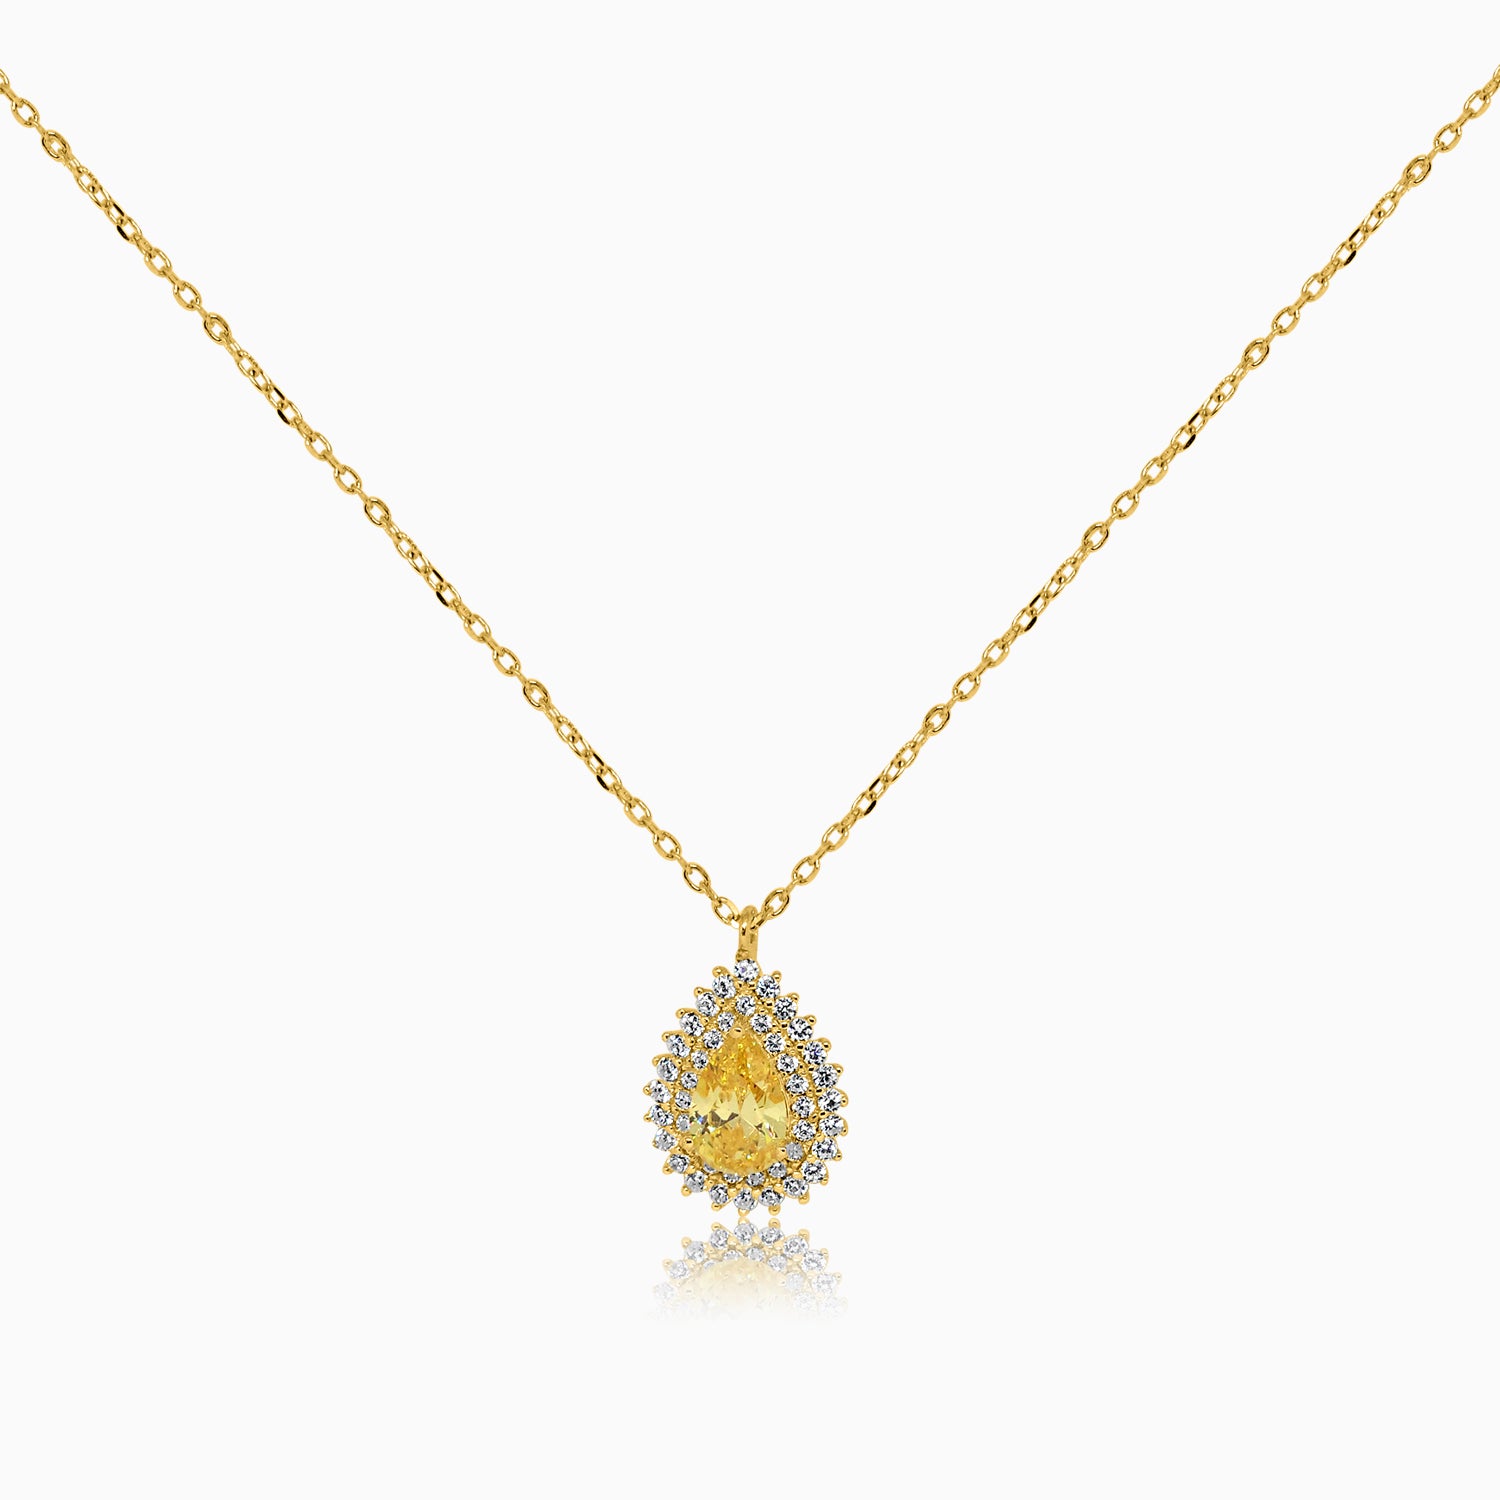 Silver Sparkling Gold Topaz Yellow Drop Necklace